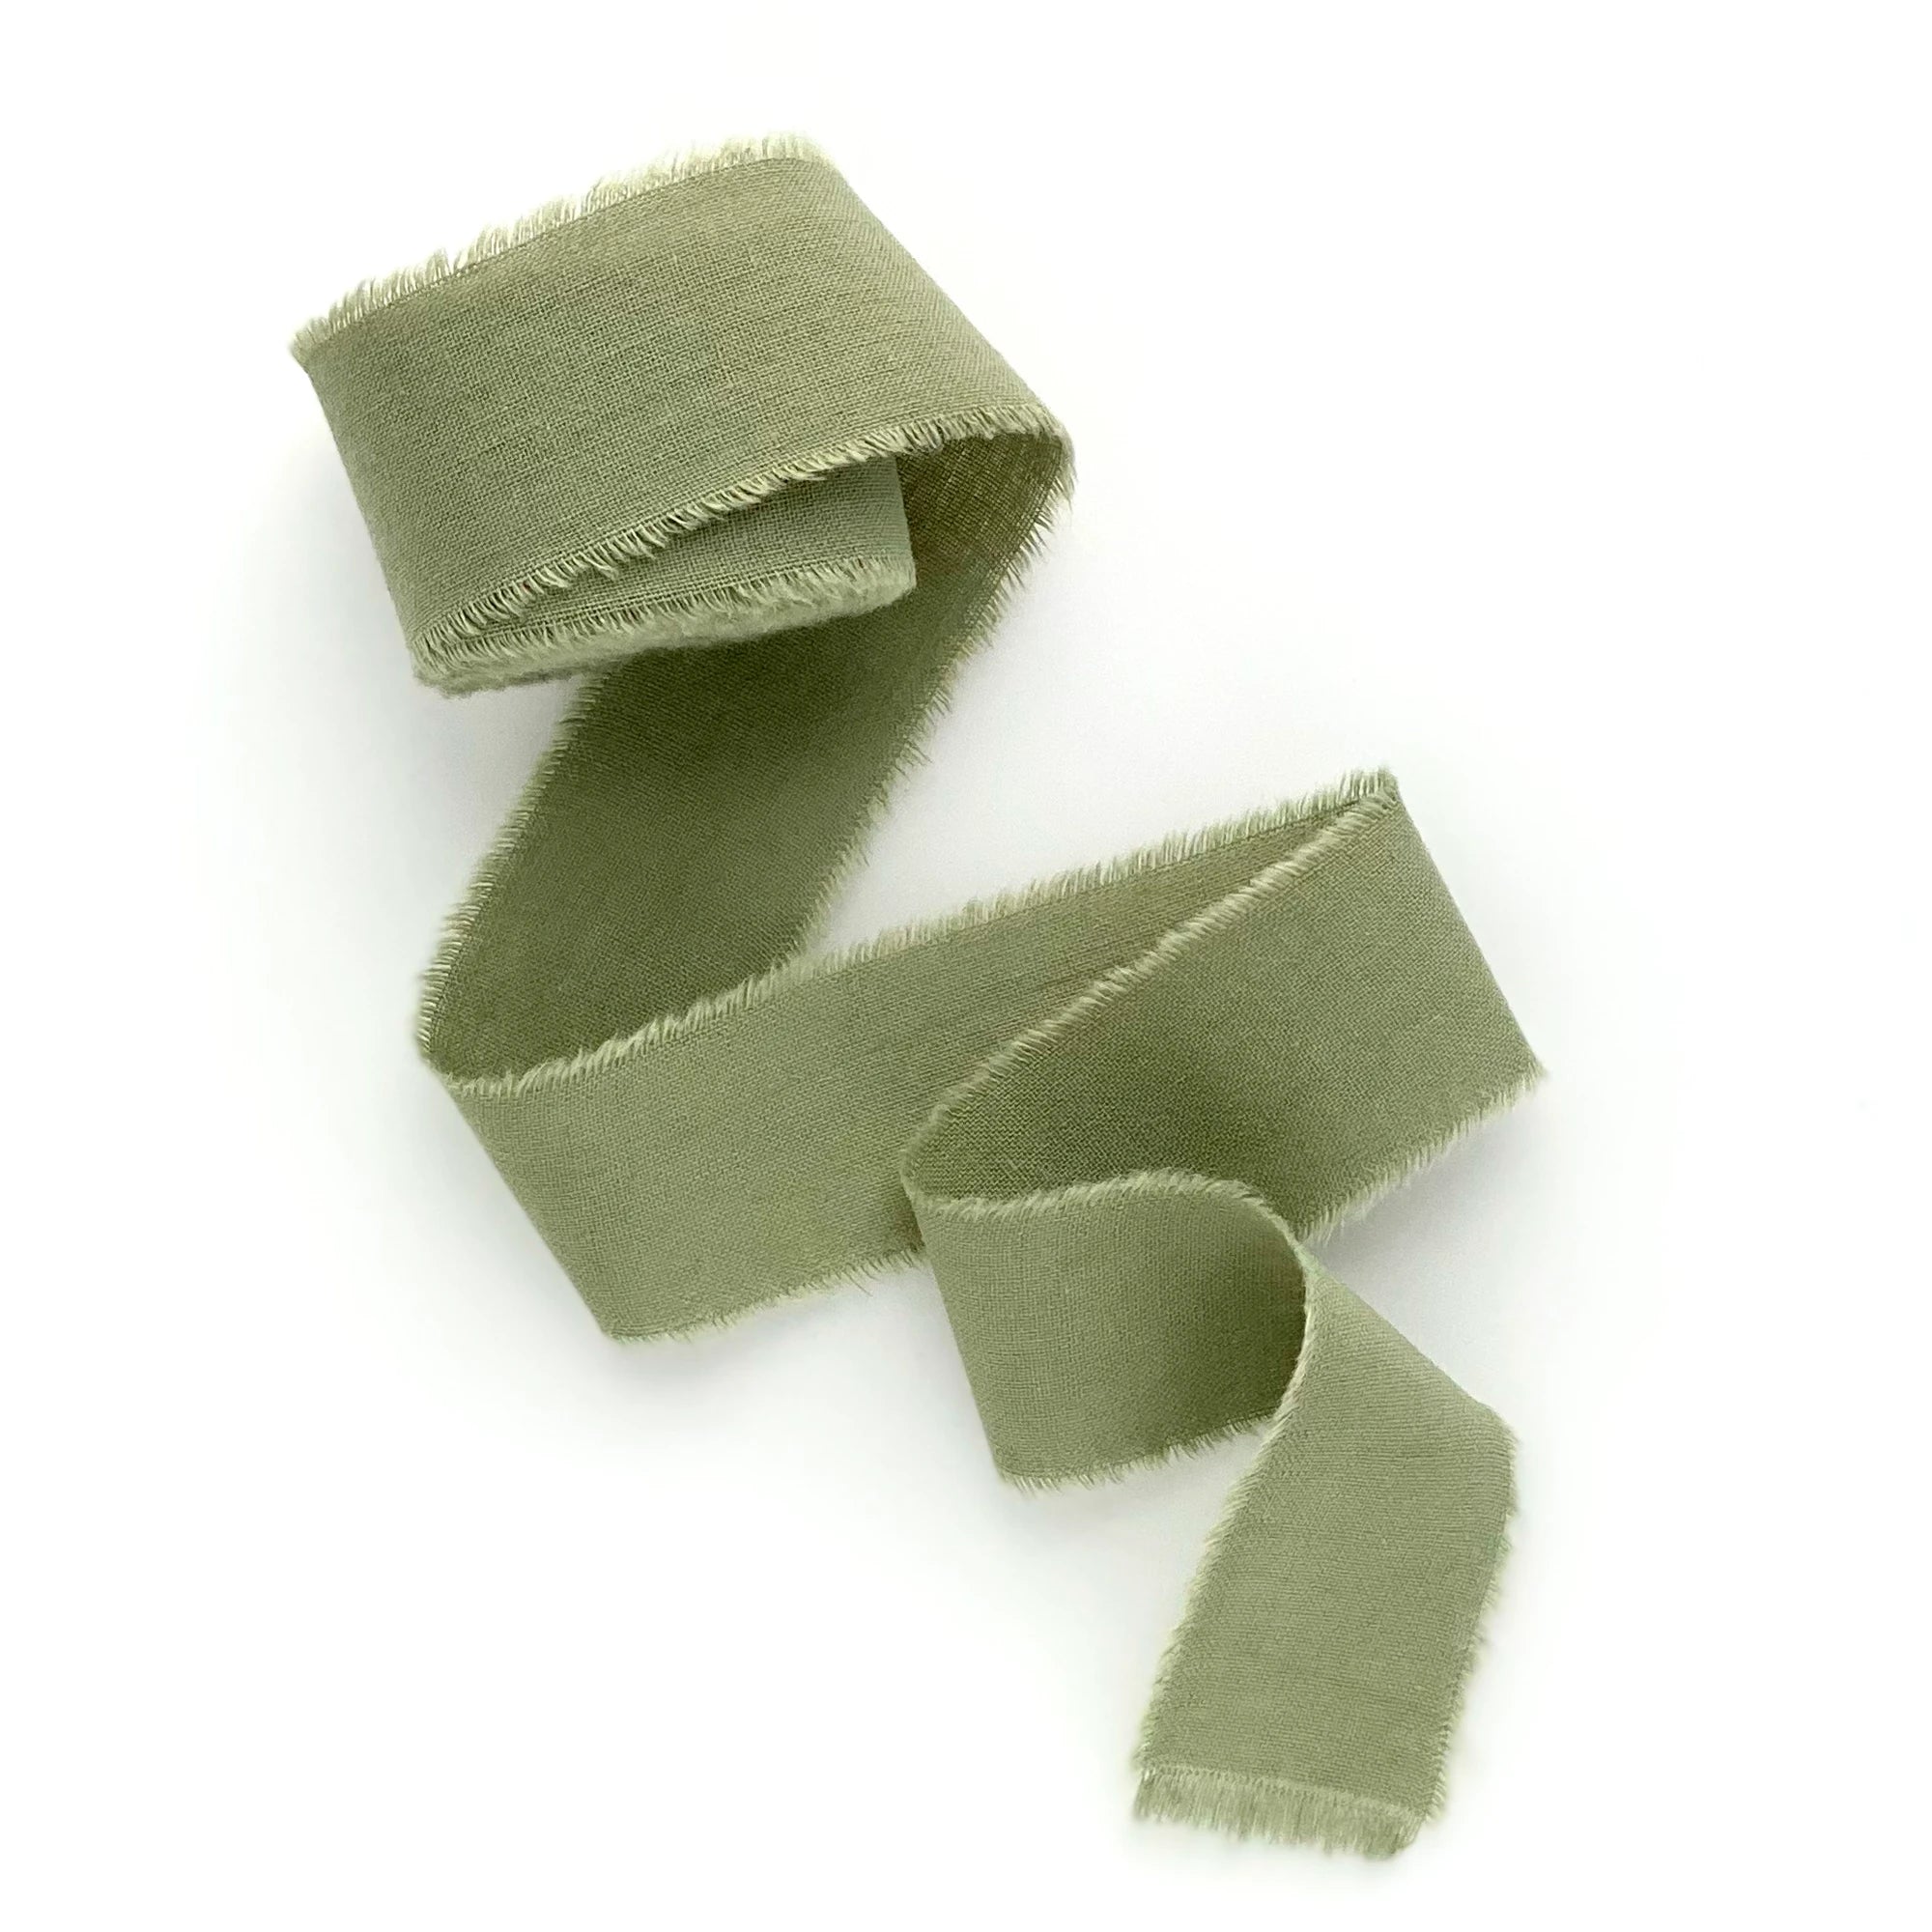 Olive green silk cotton hand dyed torn and frayed ribbon 2 inch width